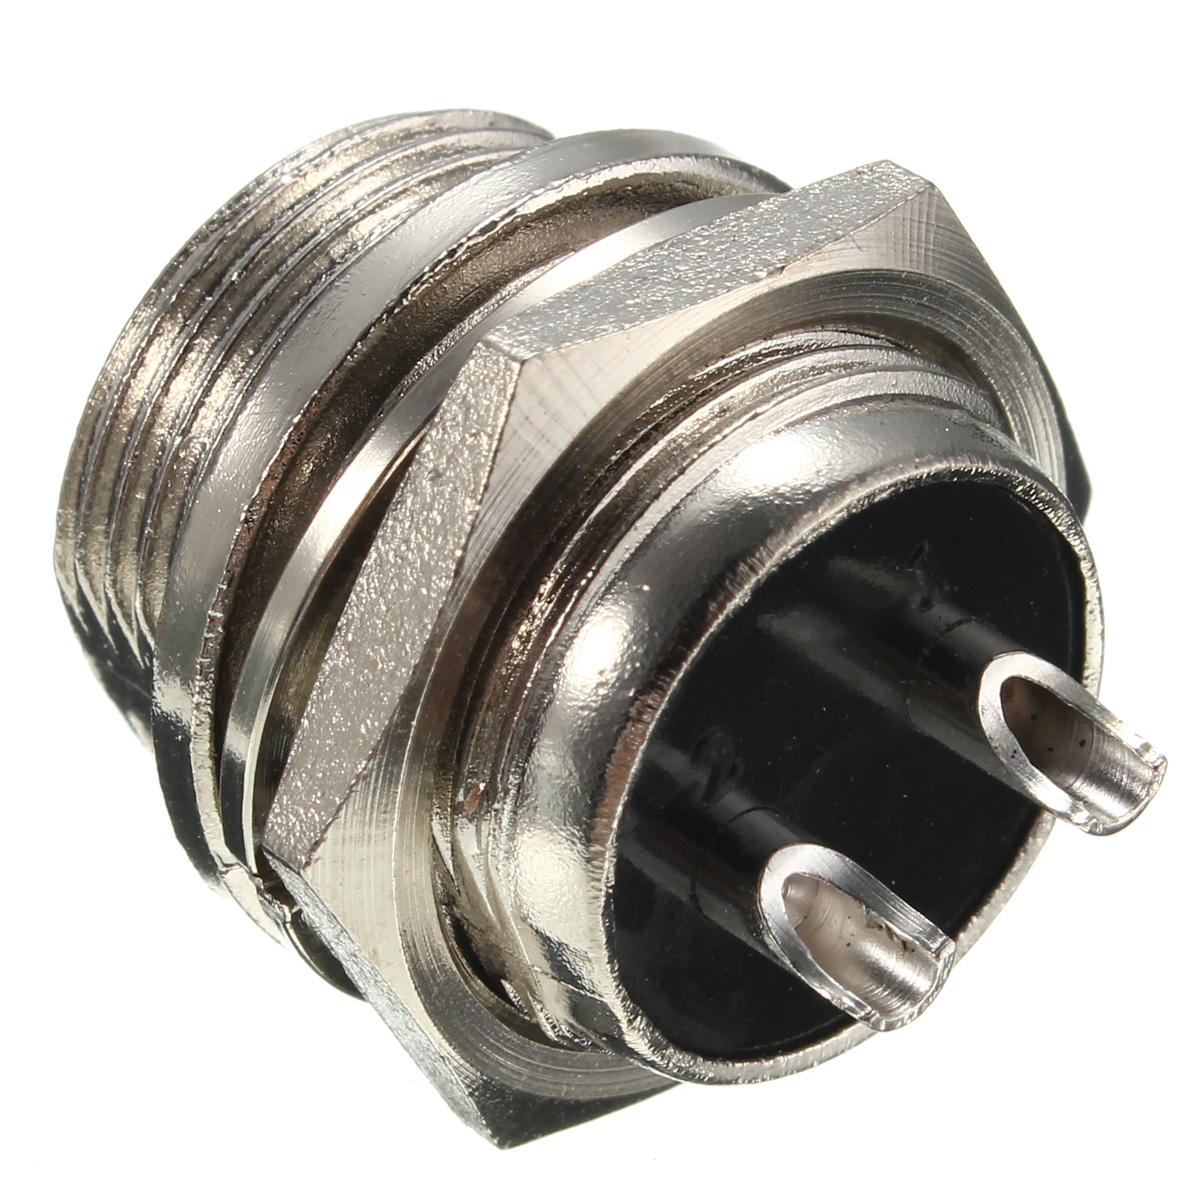 M16-2345678-Pin-Screw-Type-Electrical-Aviation-Plug-Socket-Connector-Aviation-Connector-Plug-1333374-9